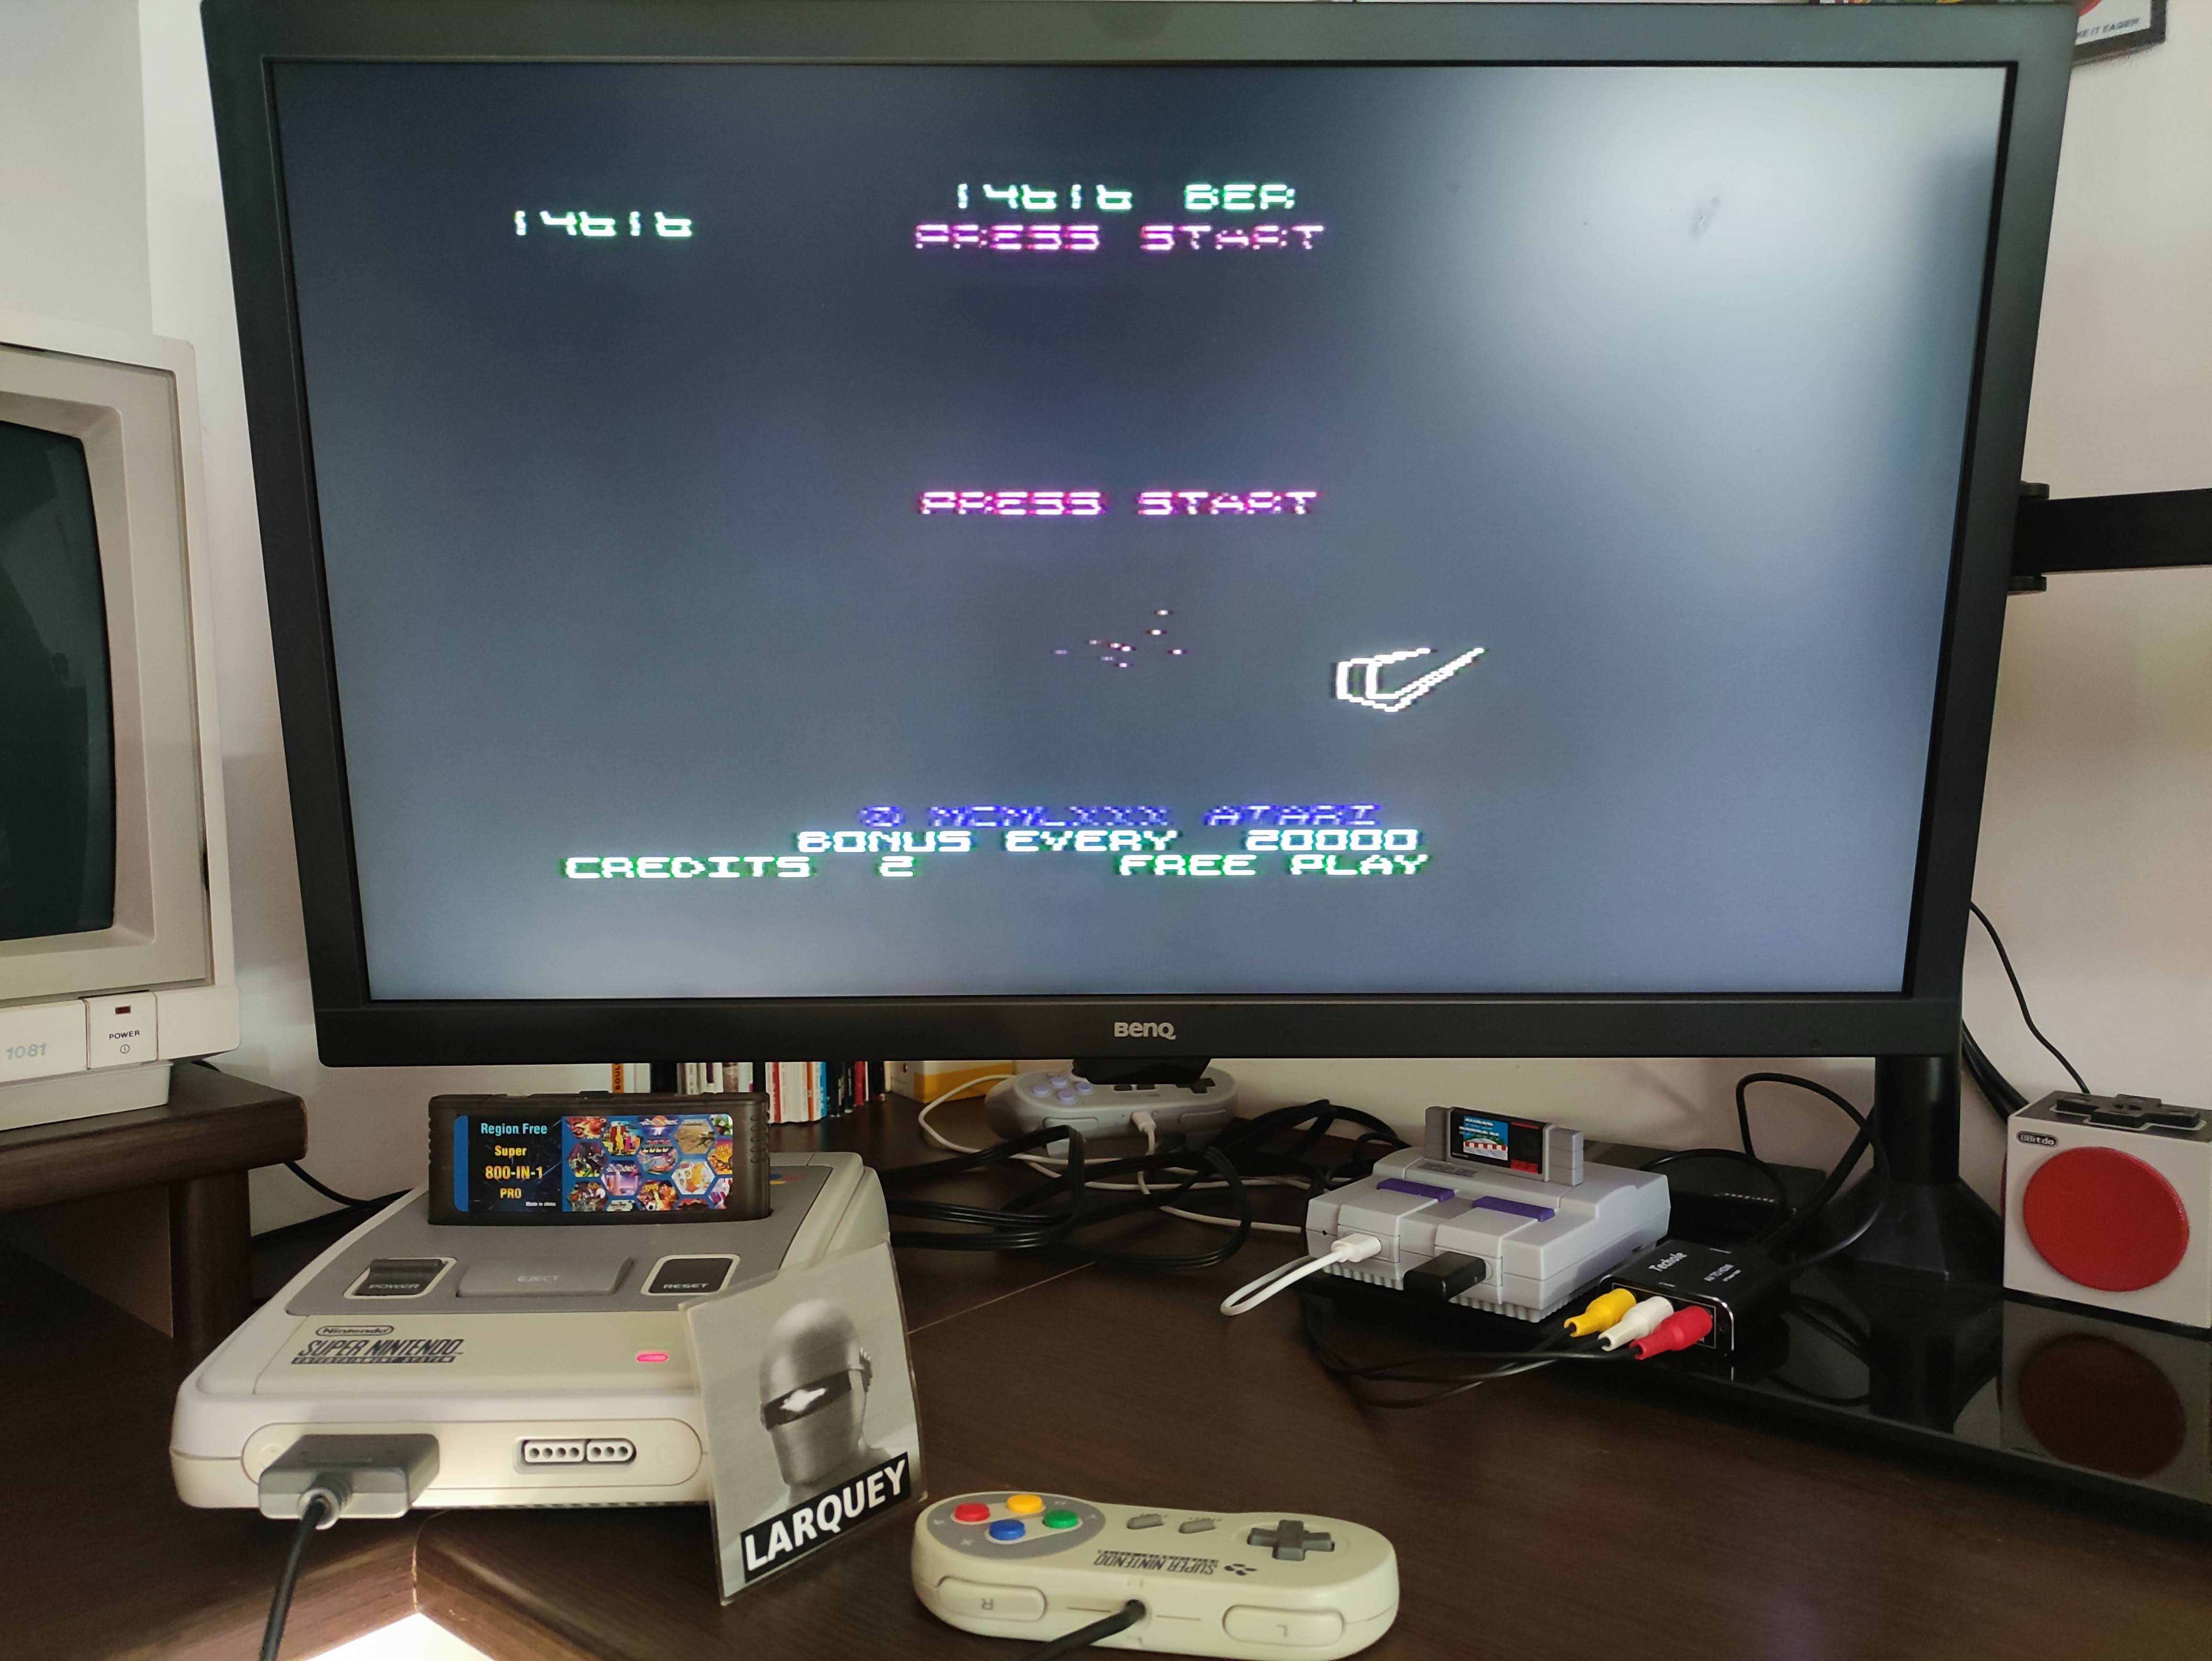 Larquey: Arcade`s Greatest Hits: The Atari Collection 1: Tempest (SNES/Super Famicom) 14,616 points on 2022-07-14 01:37:22